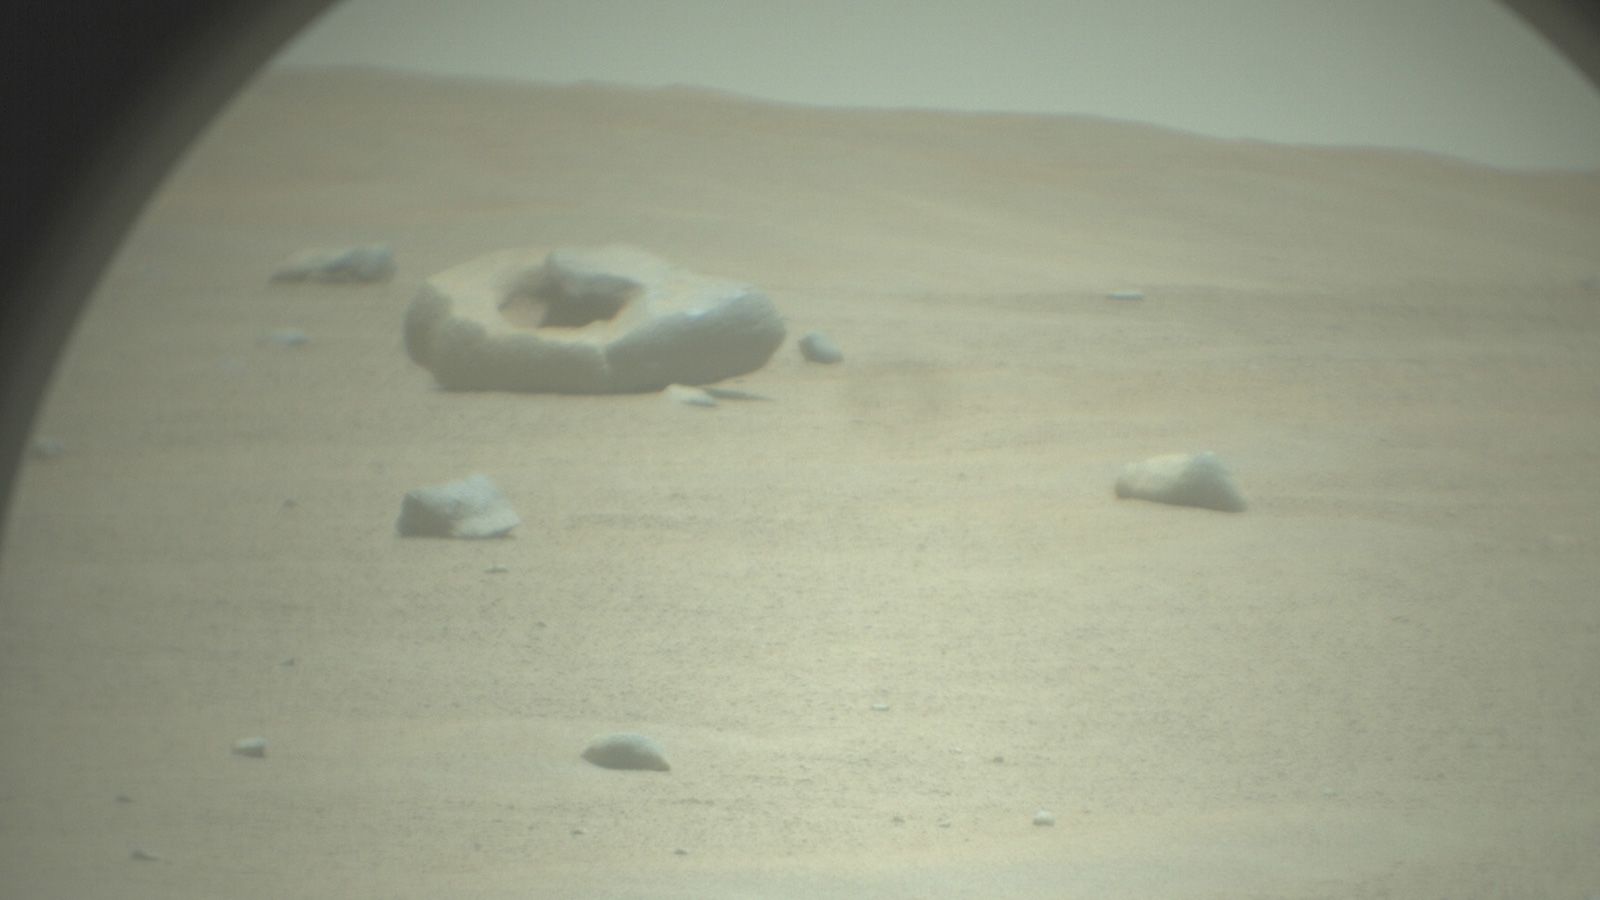 Mars 'doughnut' spotted by Perseverance rover | CNN